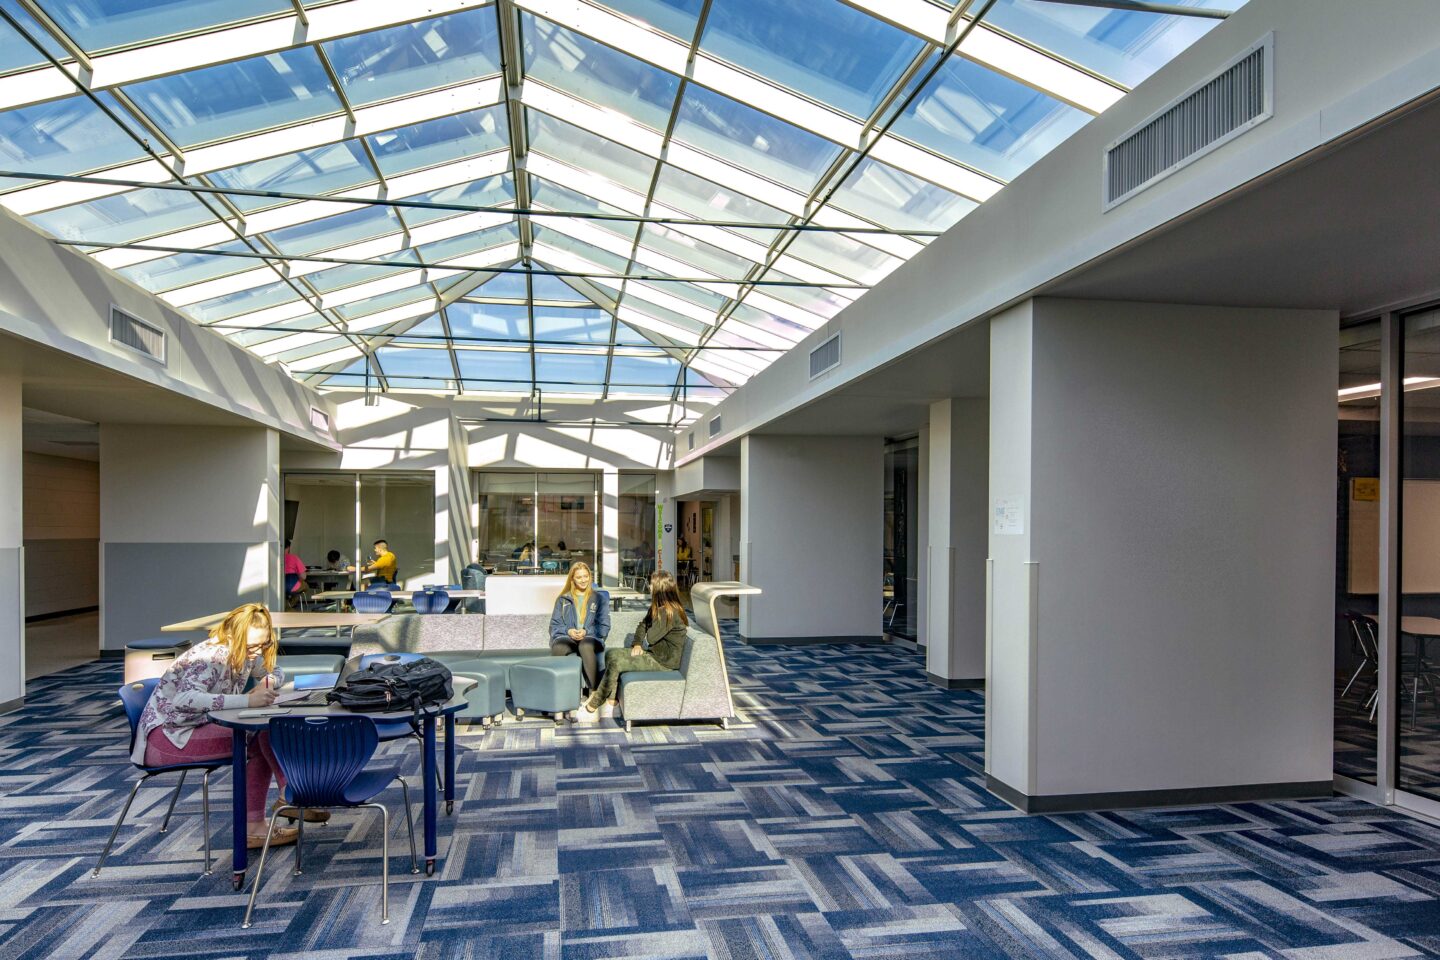 A large skylight brightens an open collaborative space connecting classrooms at Hudson High School